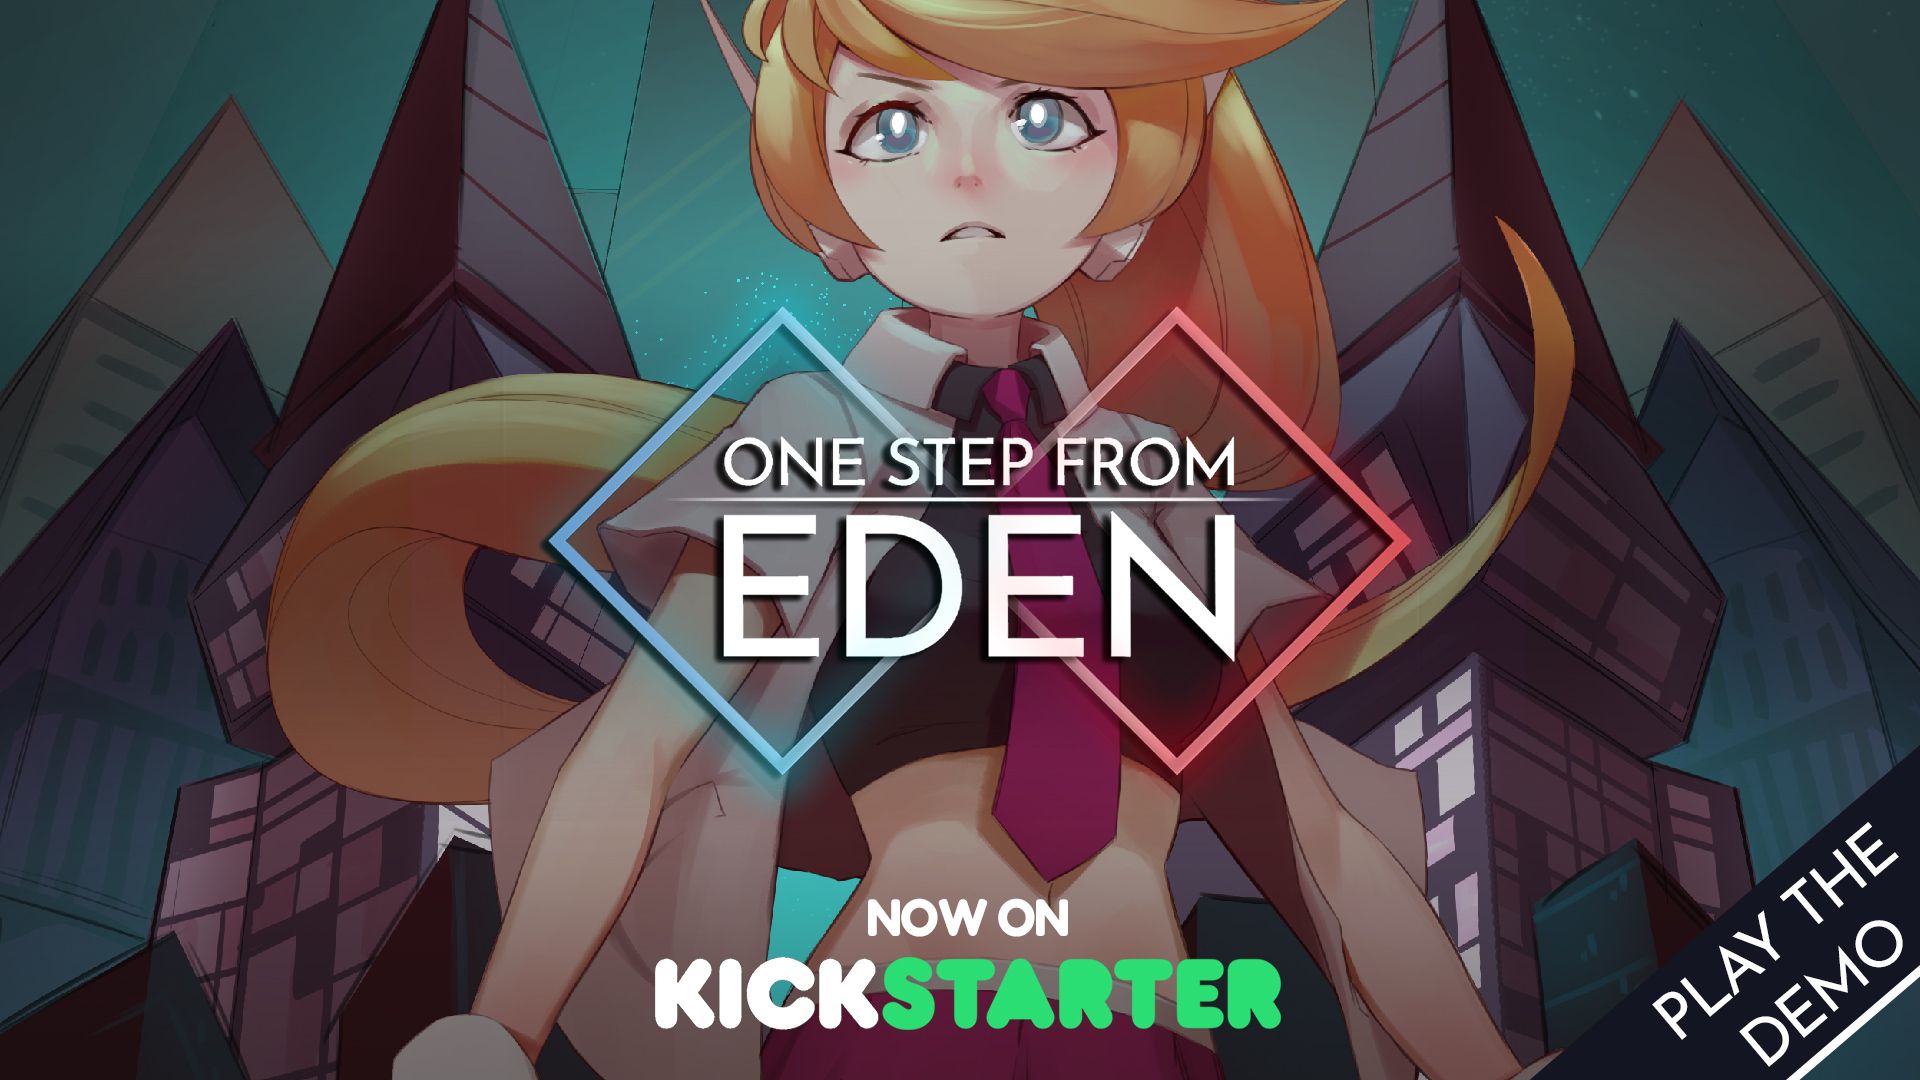 One Step from Eden: The Review